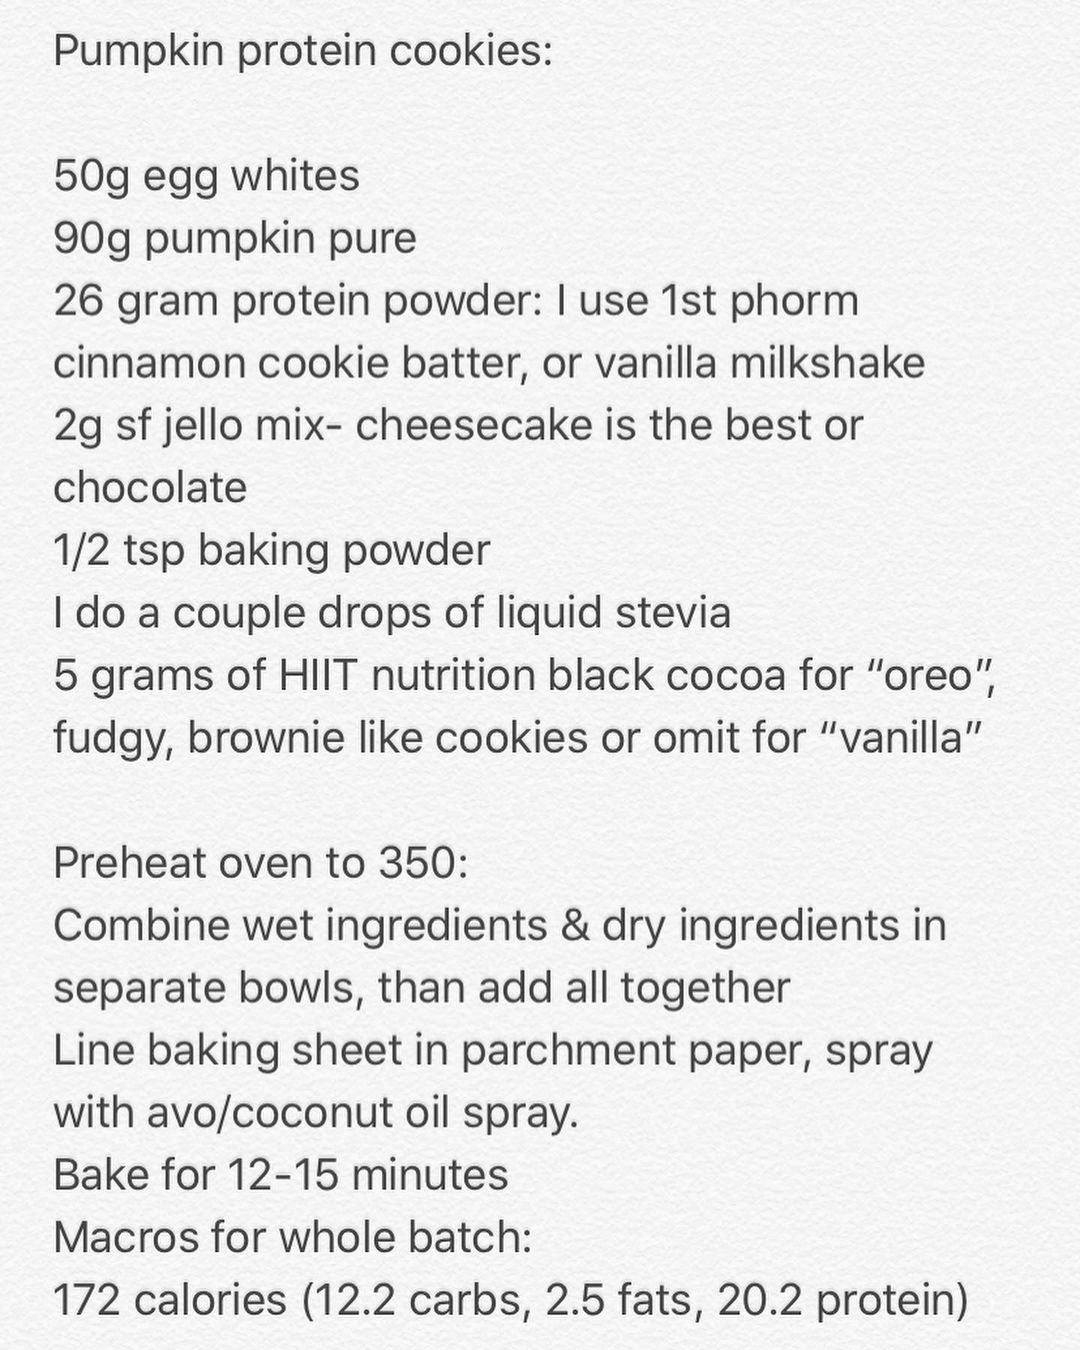 Healthy, High Protein, “Butter Cream” Frosting